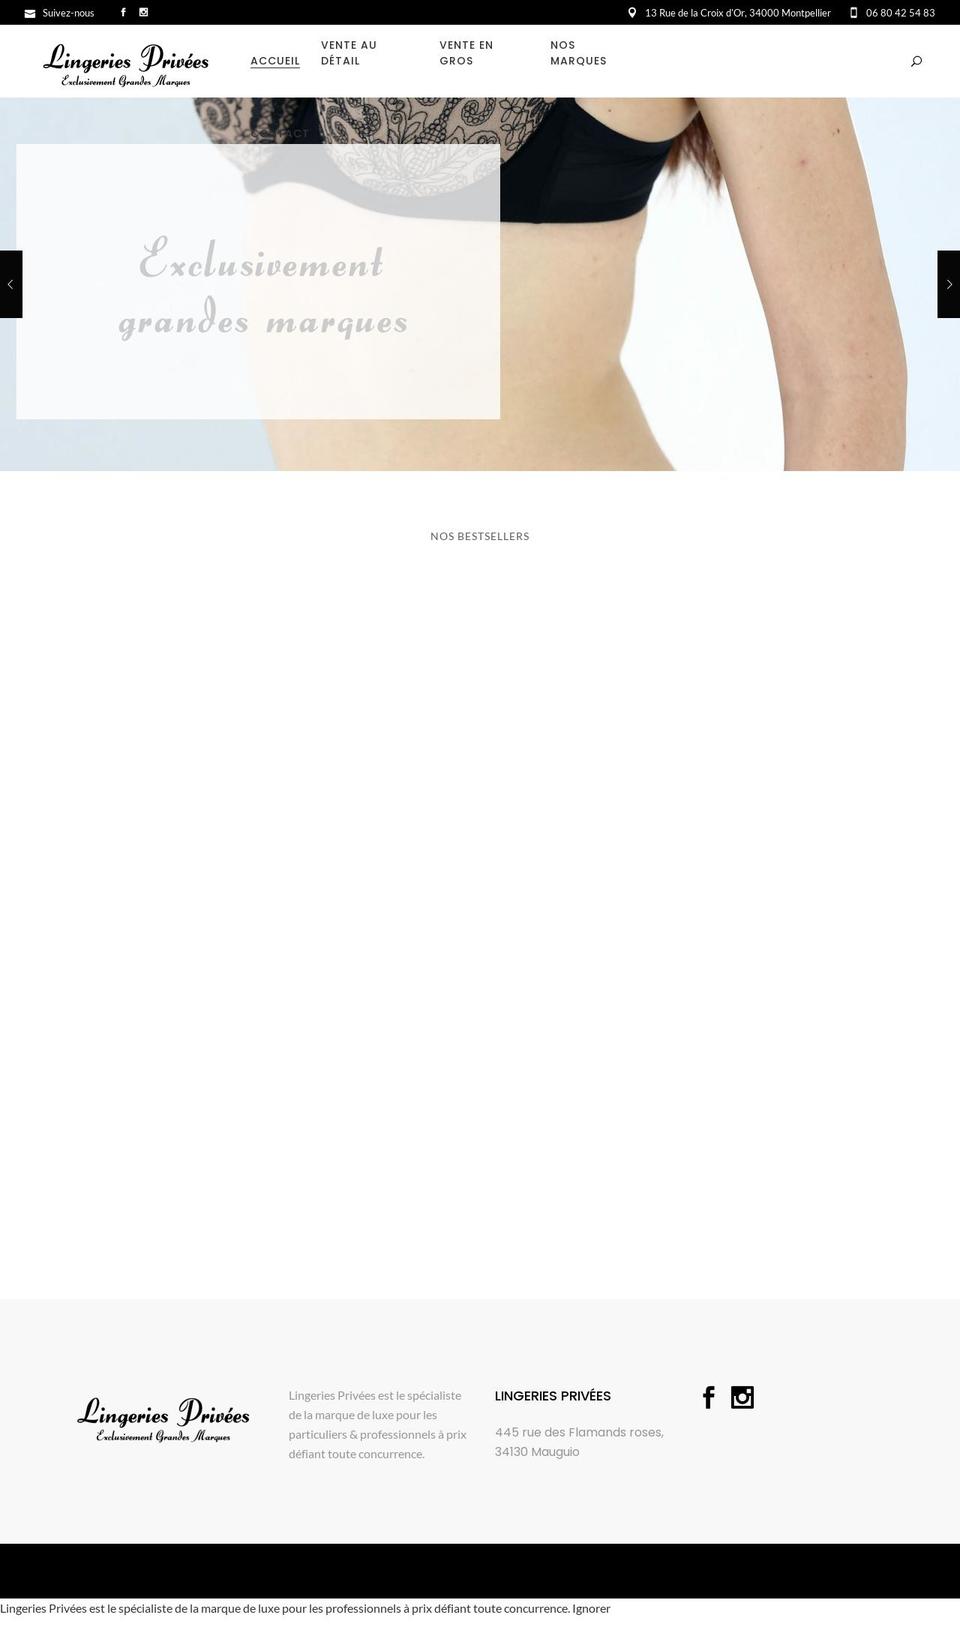 annabelle-v1-2 Shopify theme site example lingeriesprivees.fr